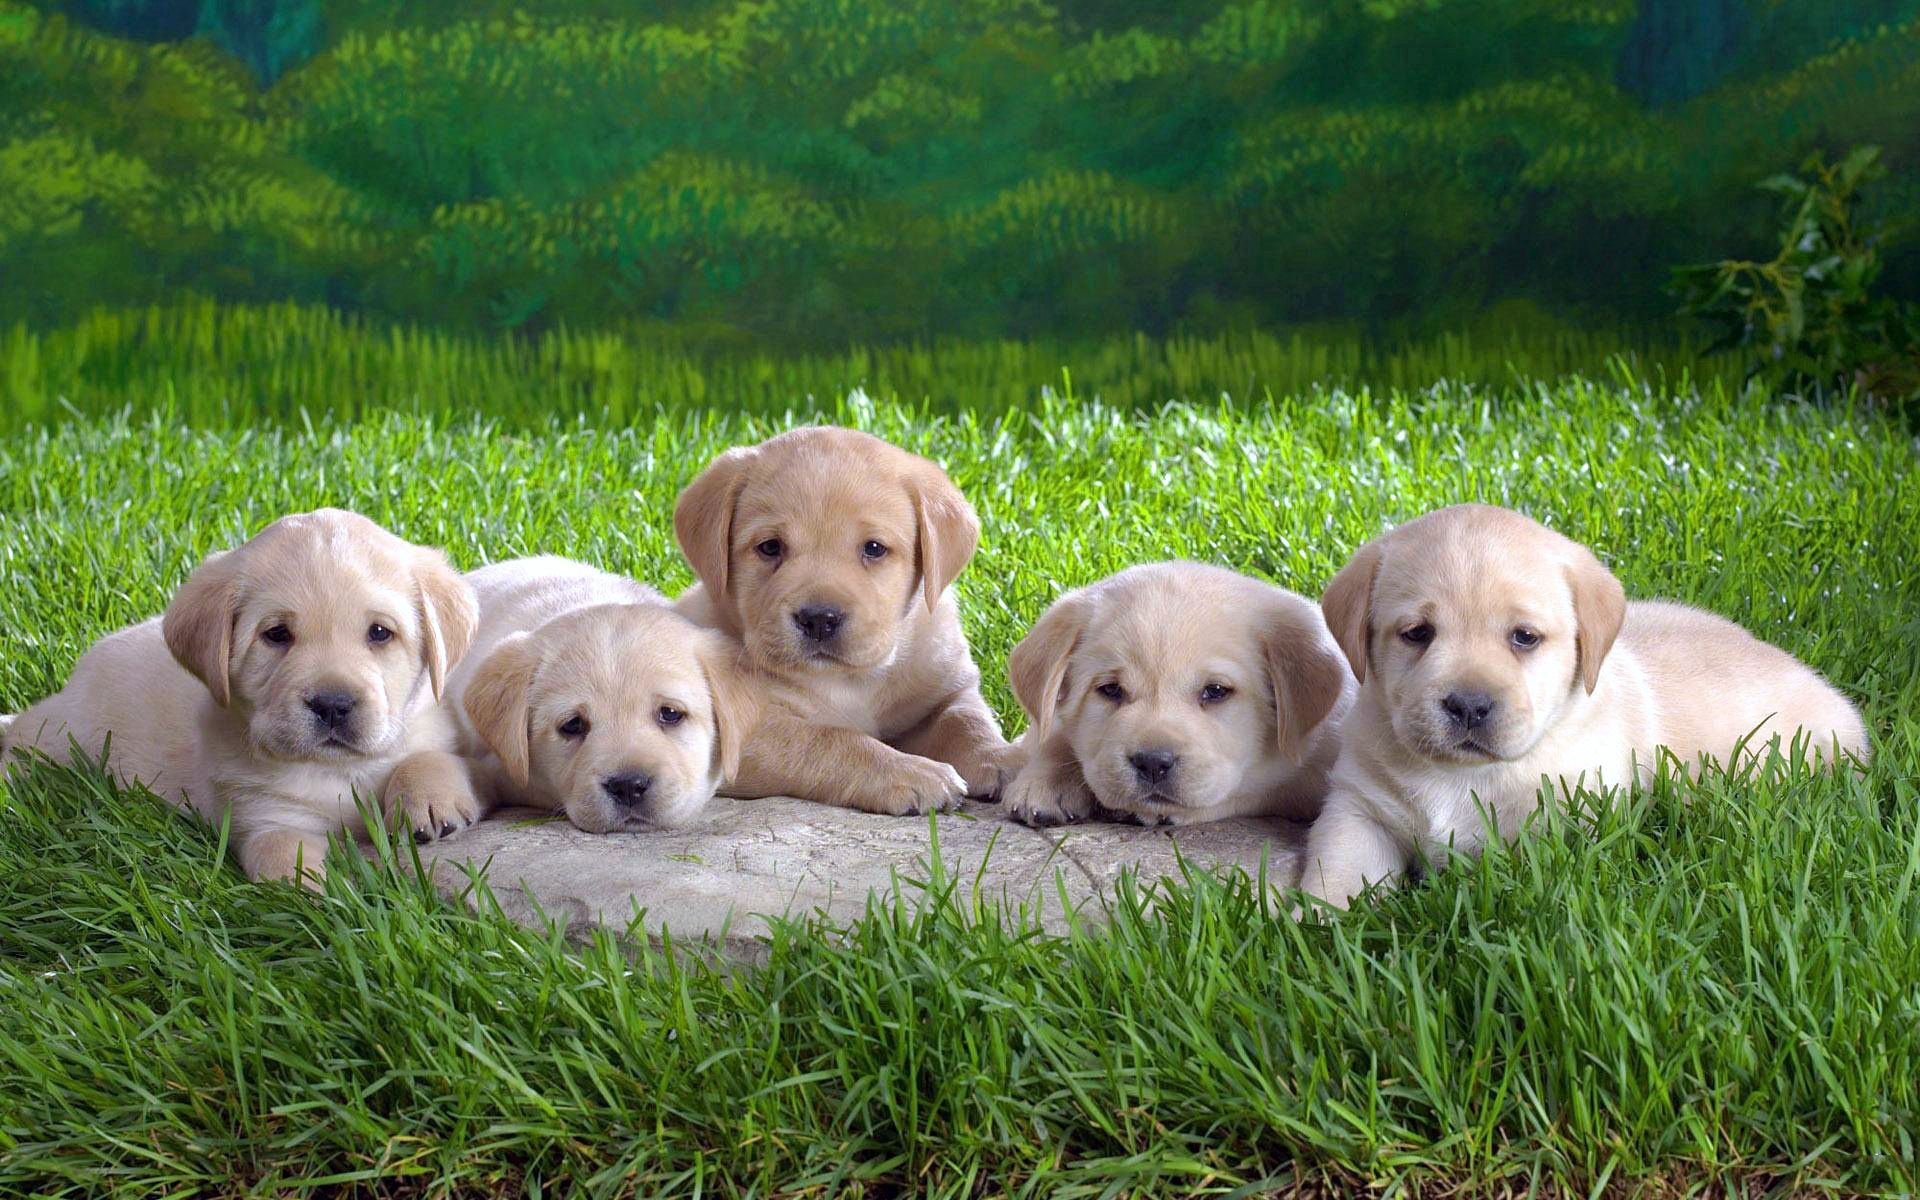 151675 Screensavers and Wallpapers Puppies for phone. Download animals, grass, to lie down, lie, labradors, puppies, lots of, multitude pictures for free